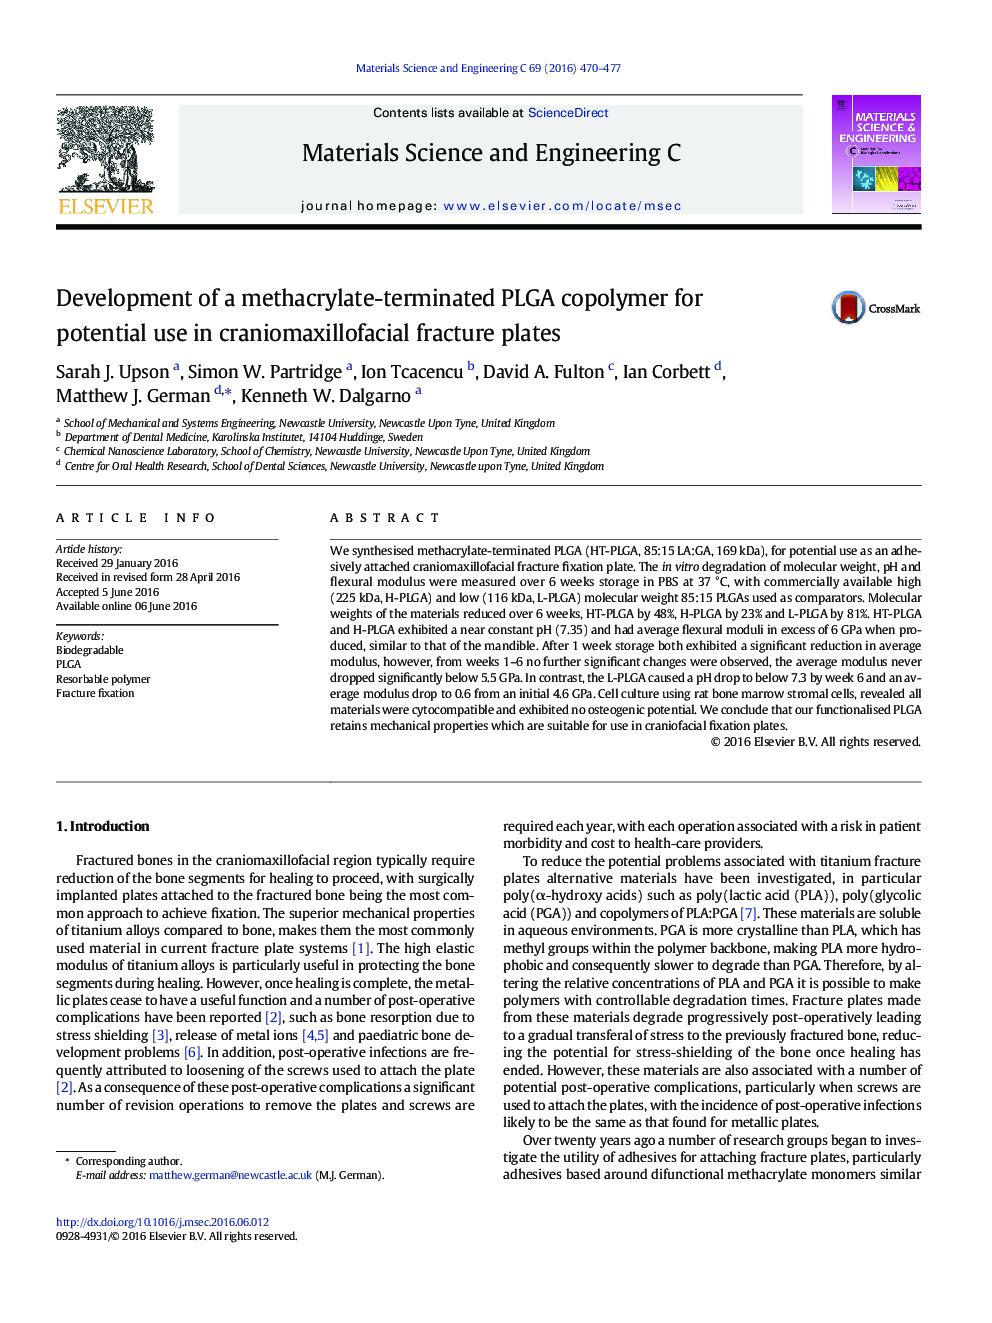 Development of a methacrylate-terminated PLGA copolymer for potential use in craniomaxillofacial fracture plates